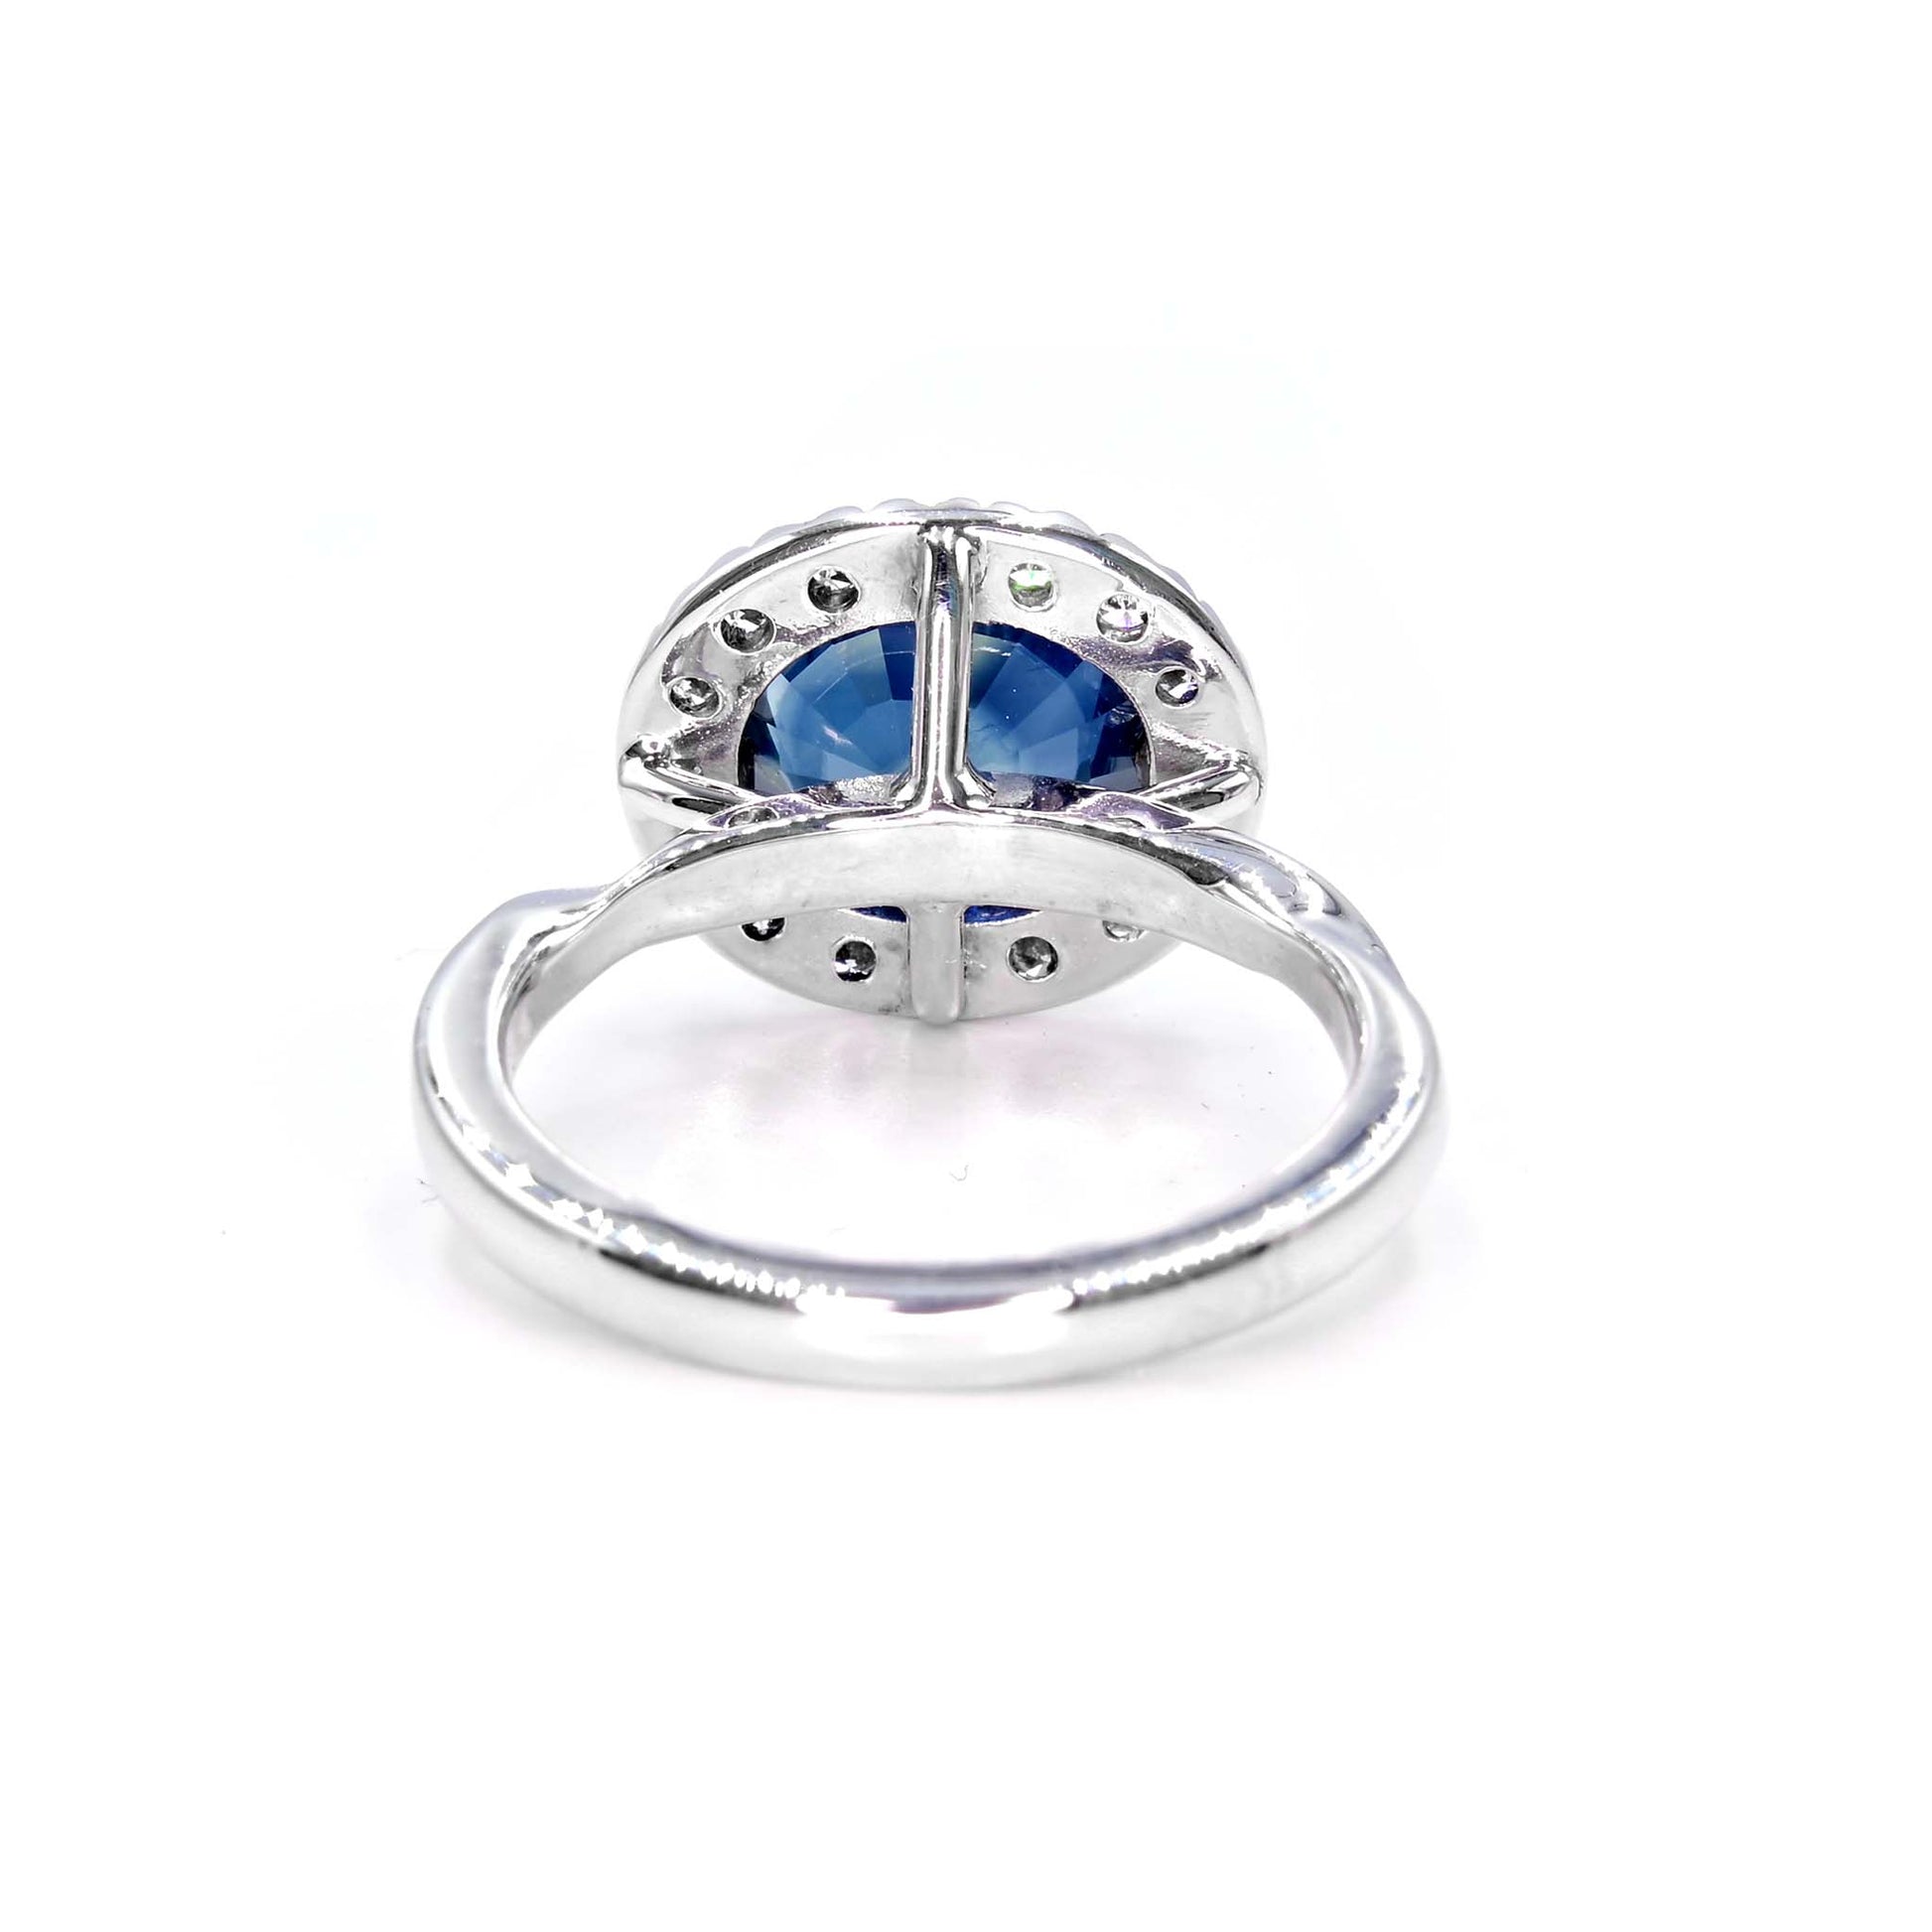 One-of-a-kind handmade ring in Chiang Mai, Thailand featuring large size blue sapphire and diamonds